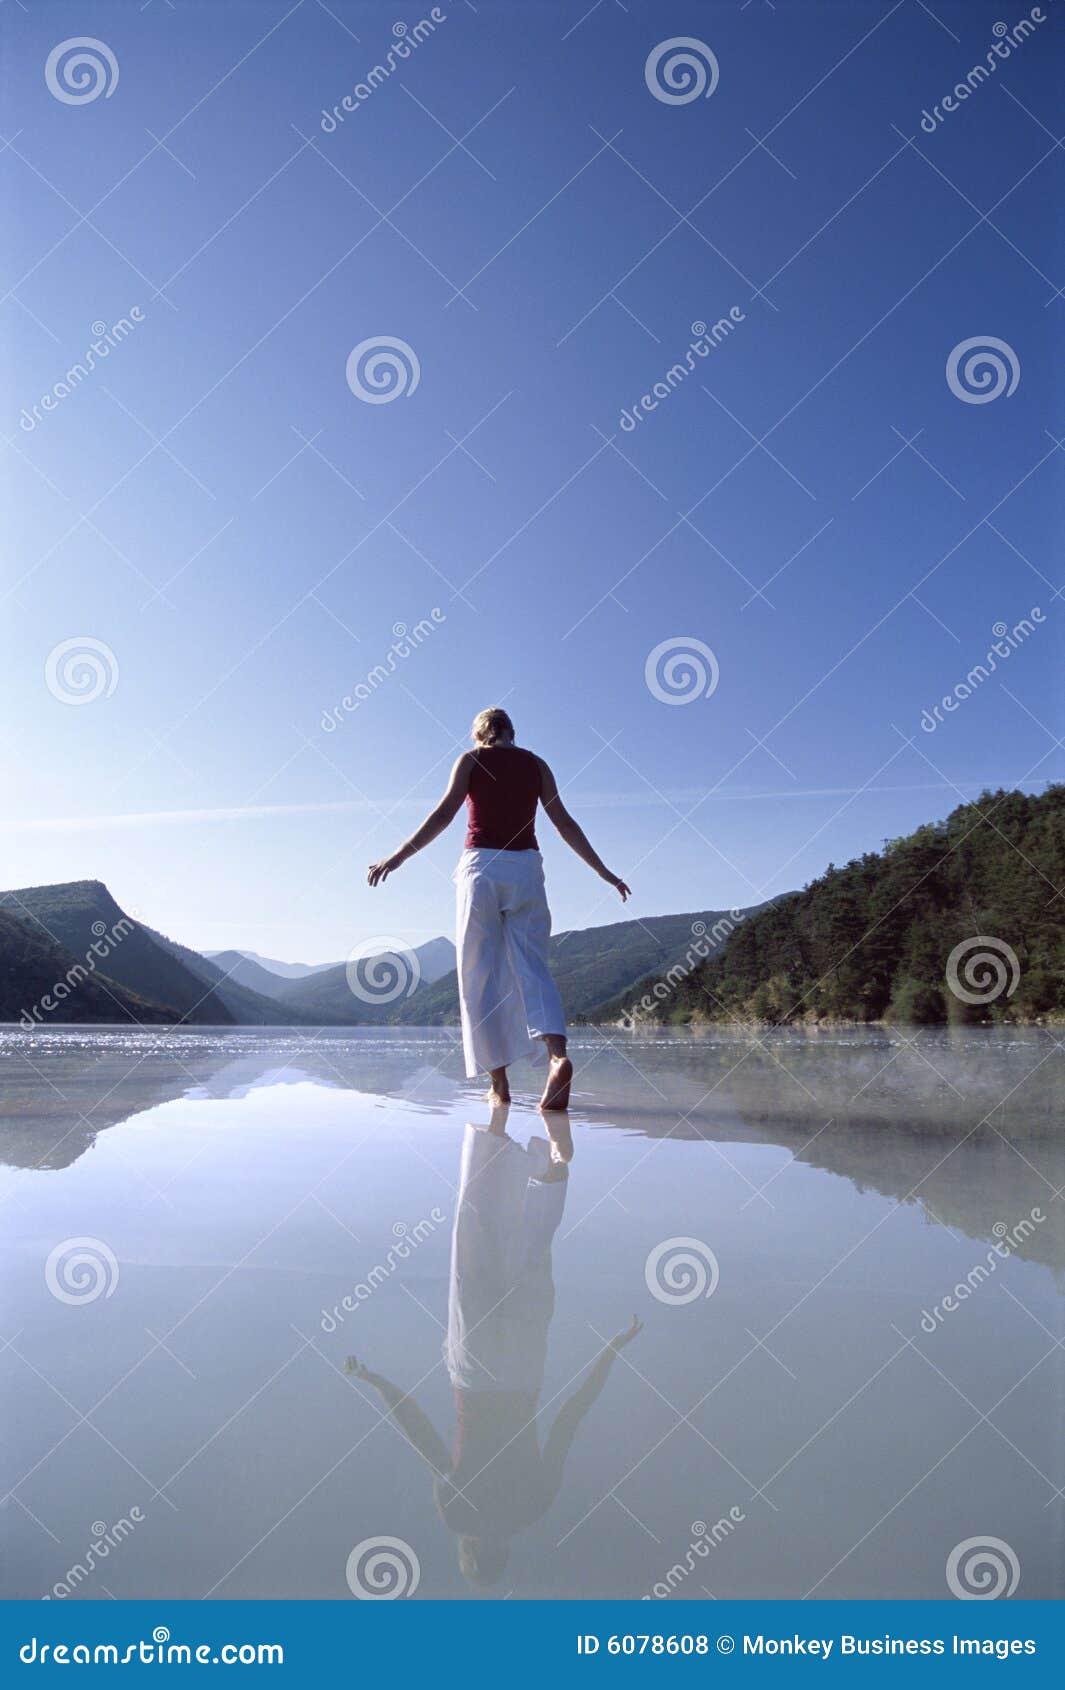 young woman wading in lake